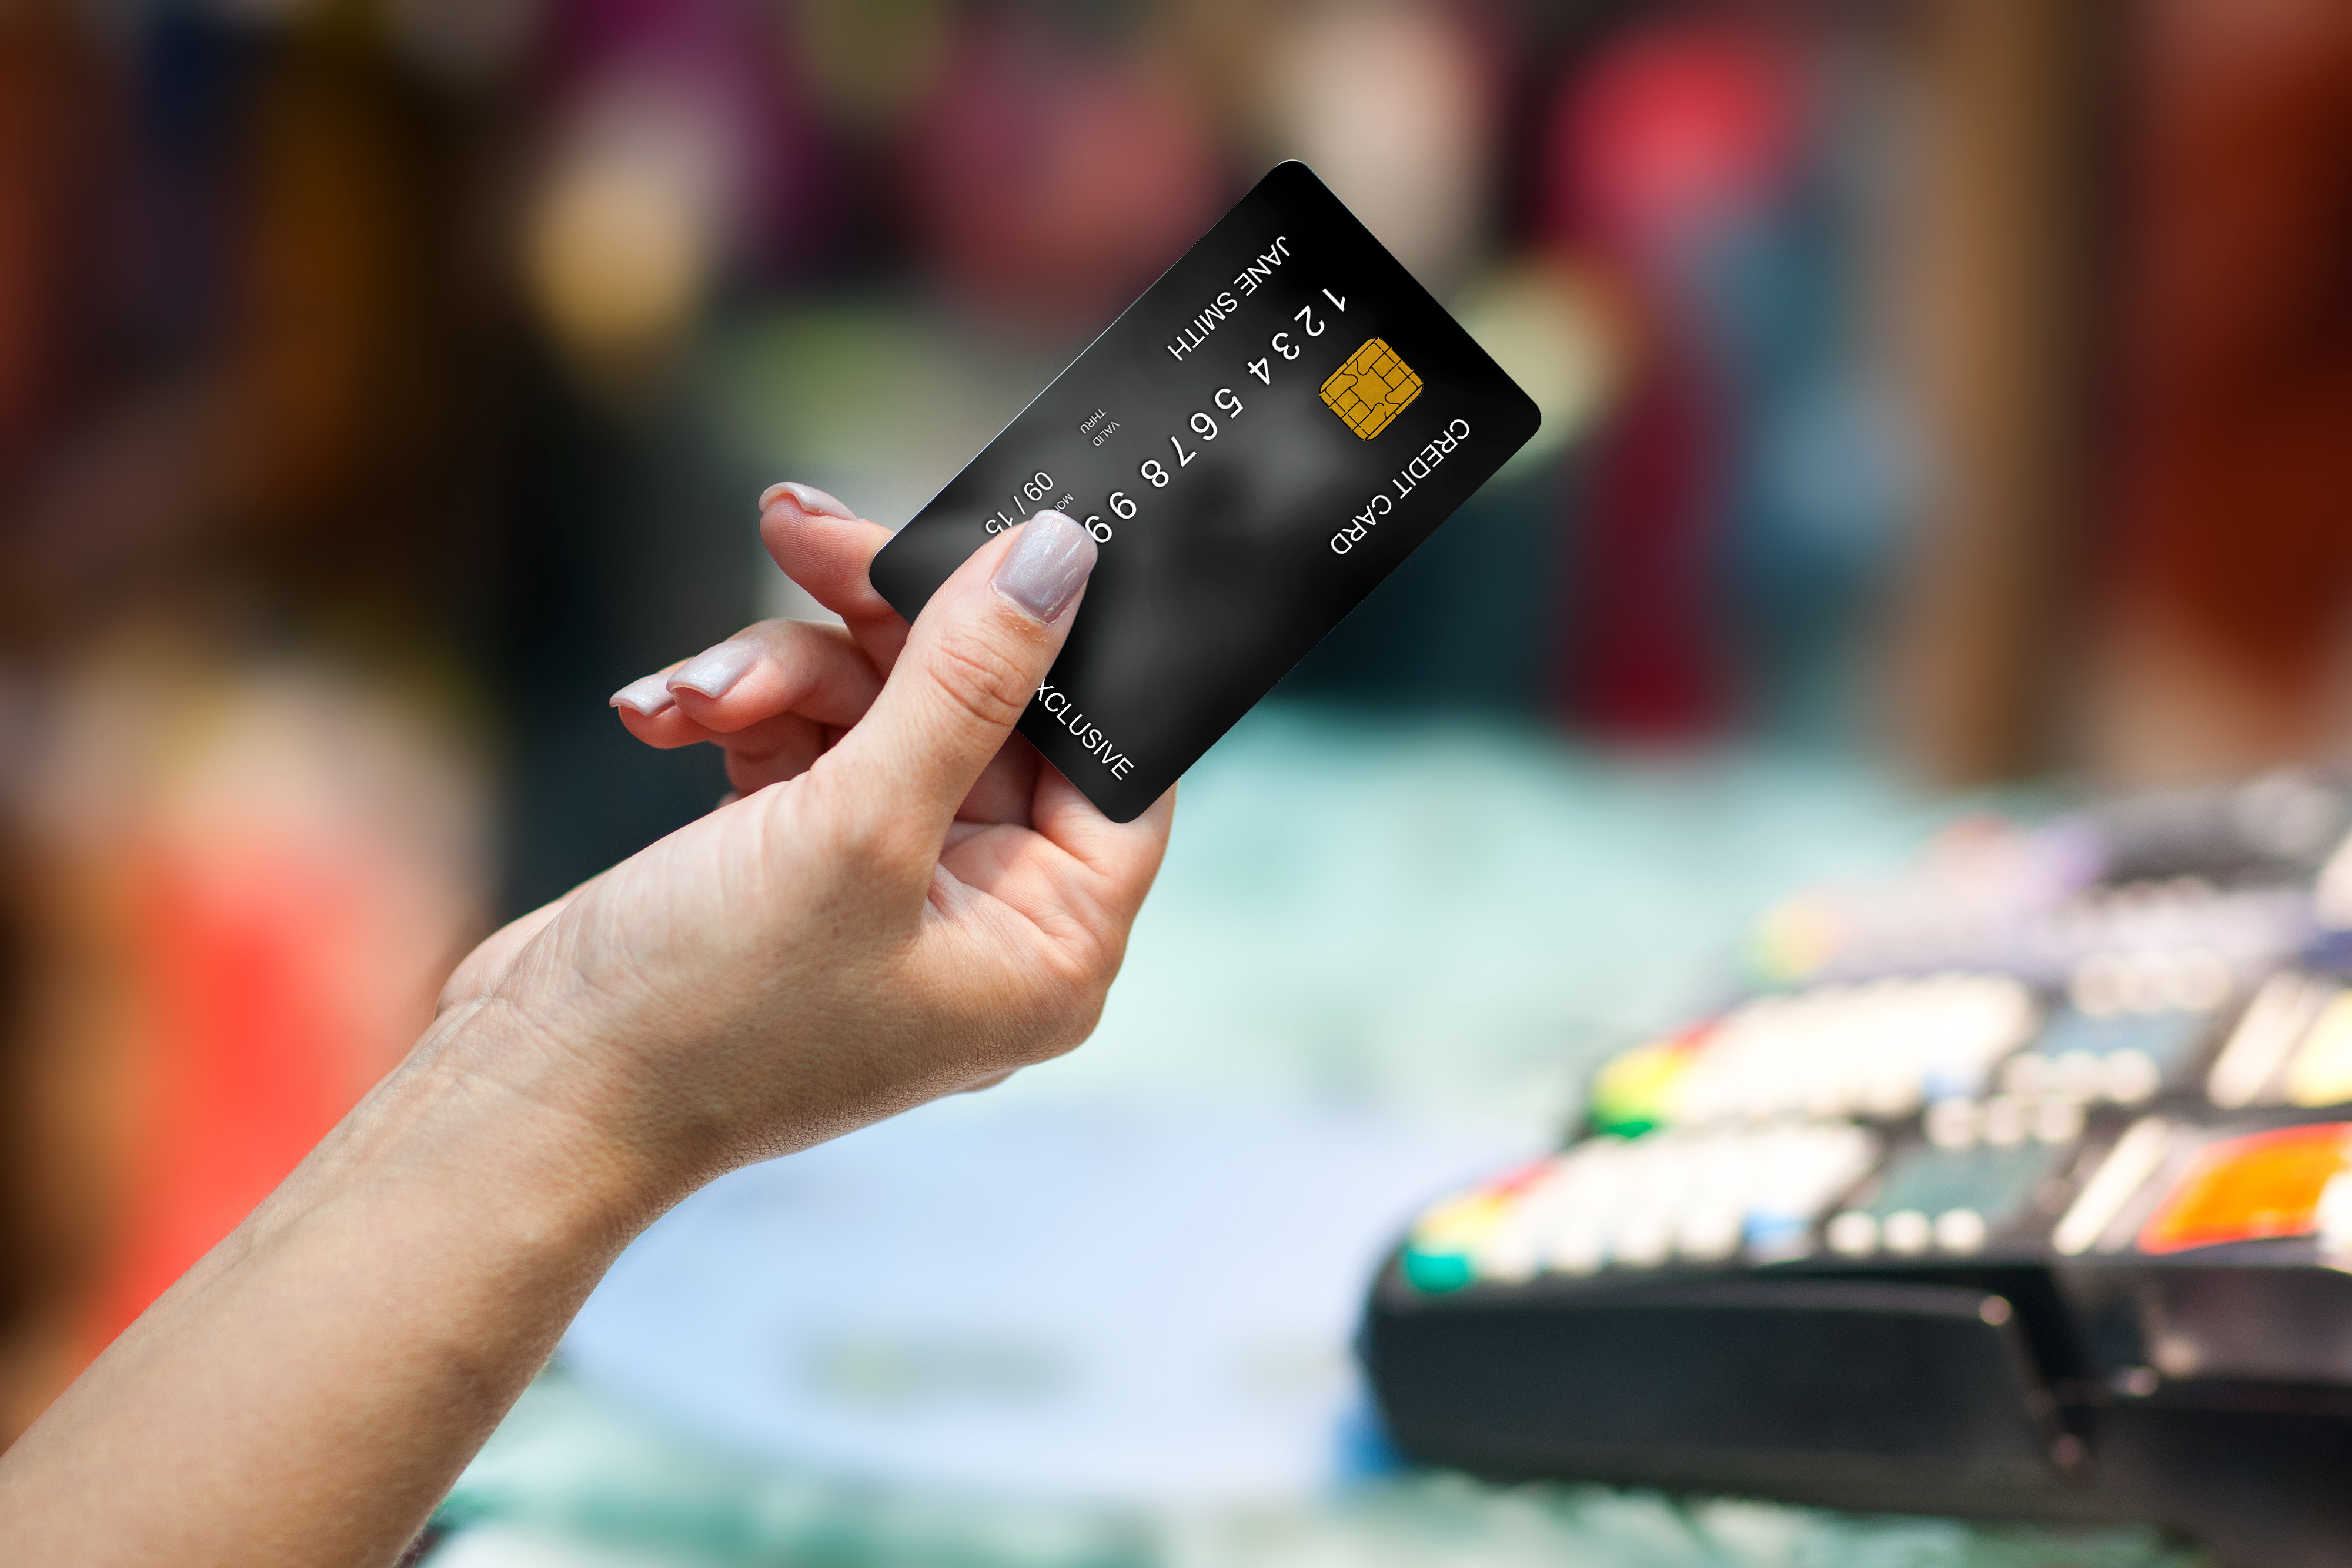 New rules announced by ACCC on excessive credit card surcharges